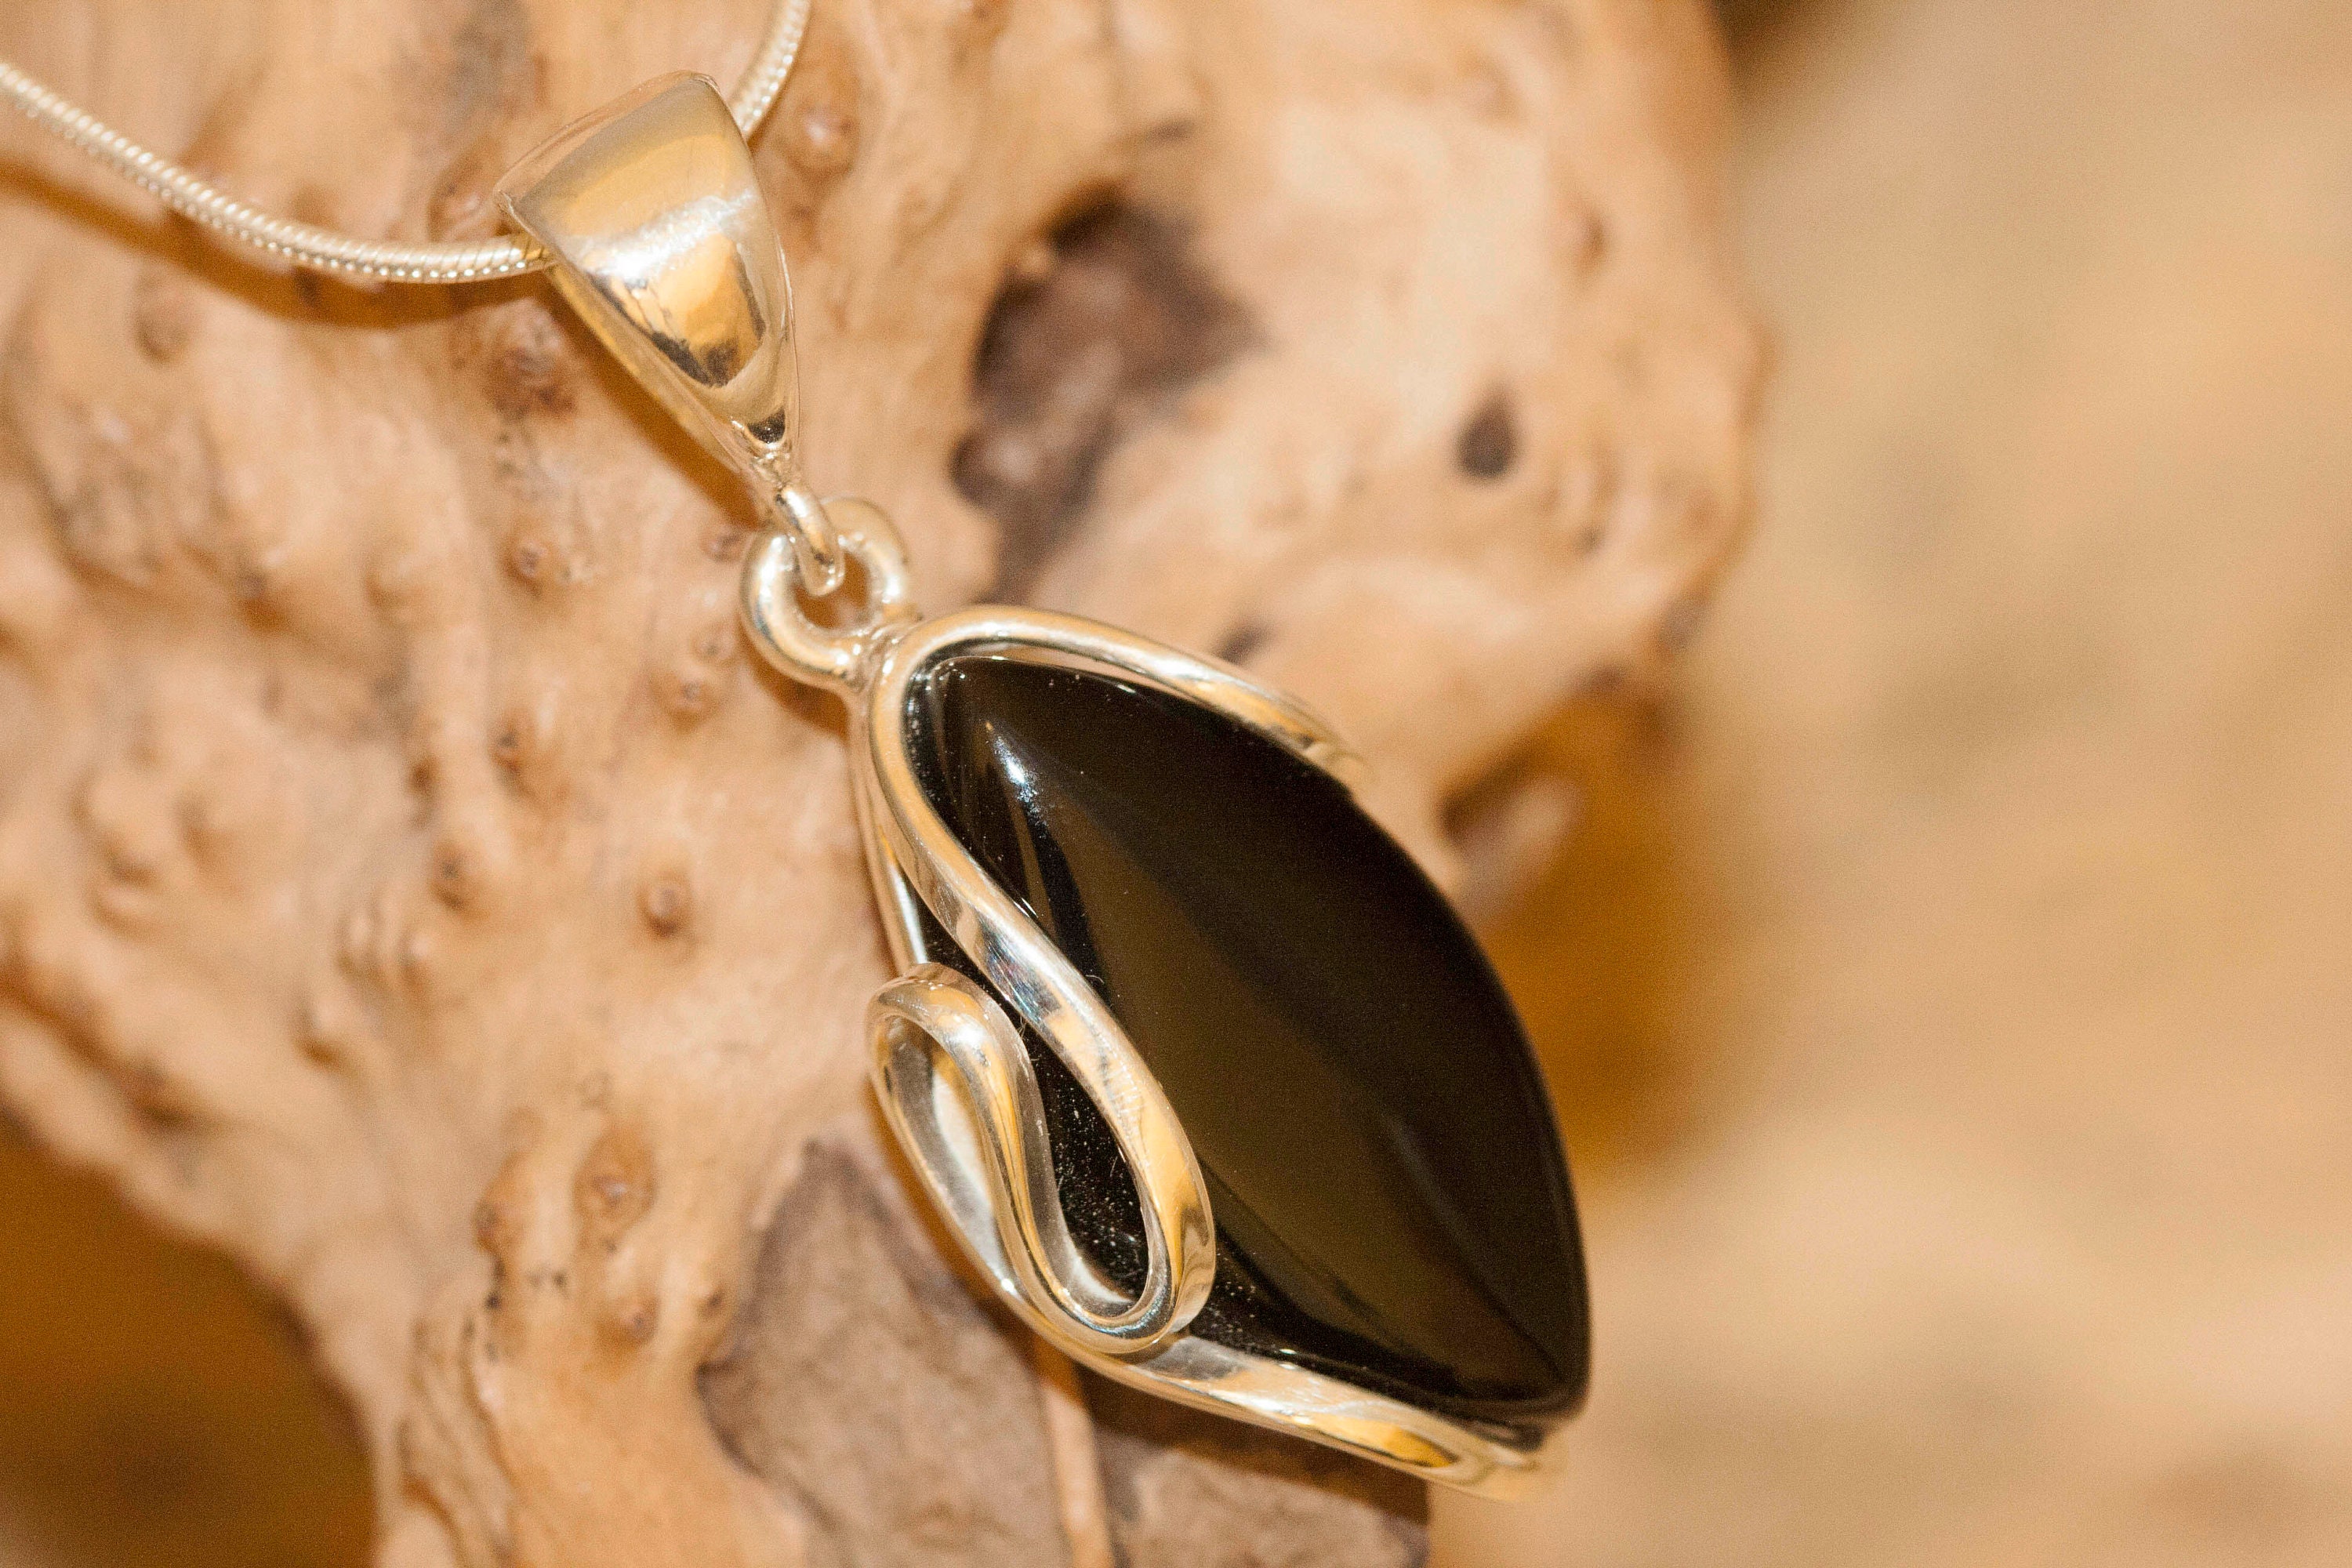 Black Onyx Pendant fitted in Sterling Silver setting. Onyx pendants